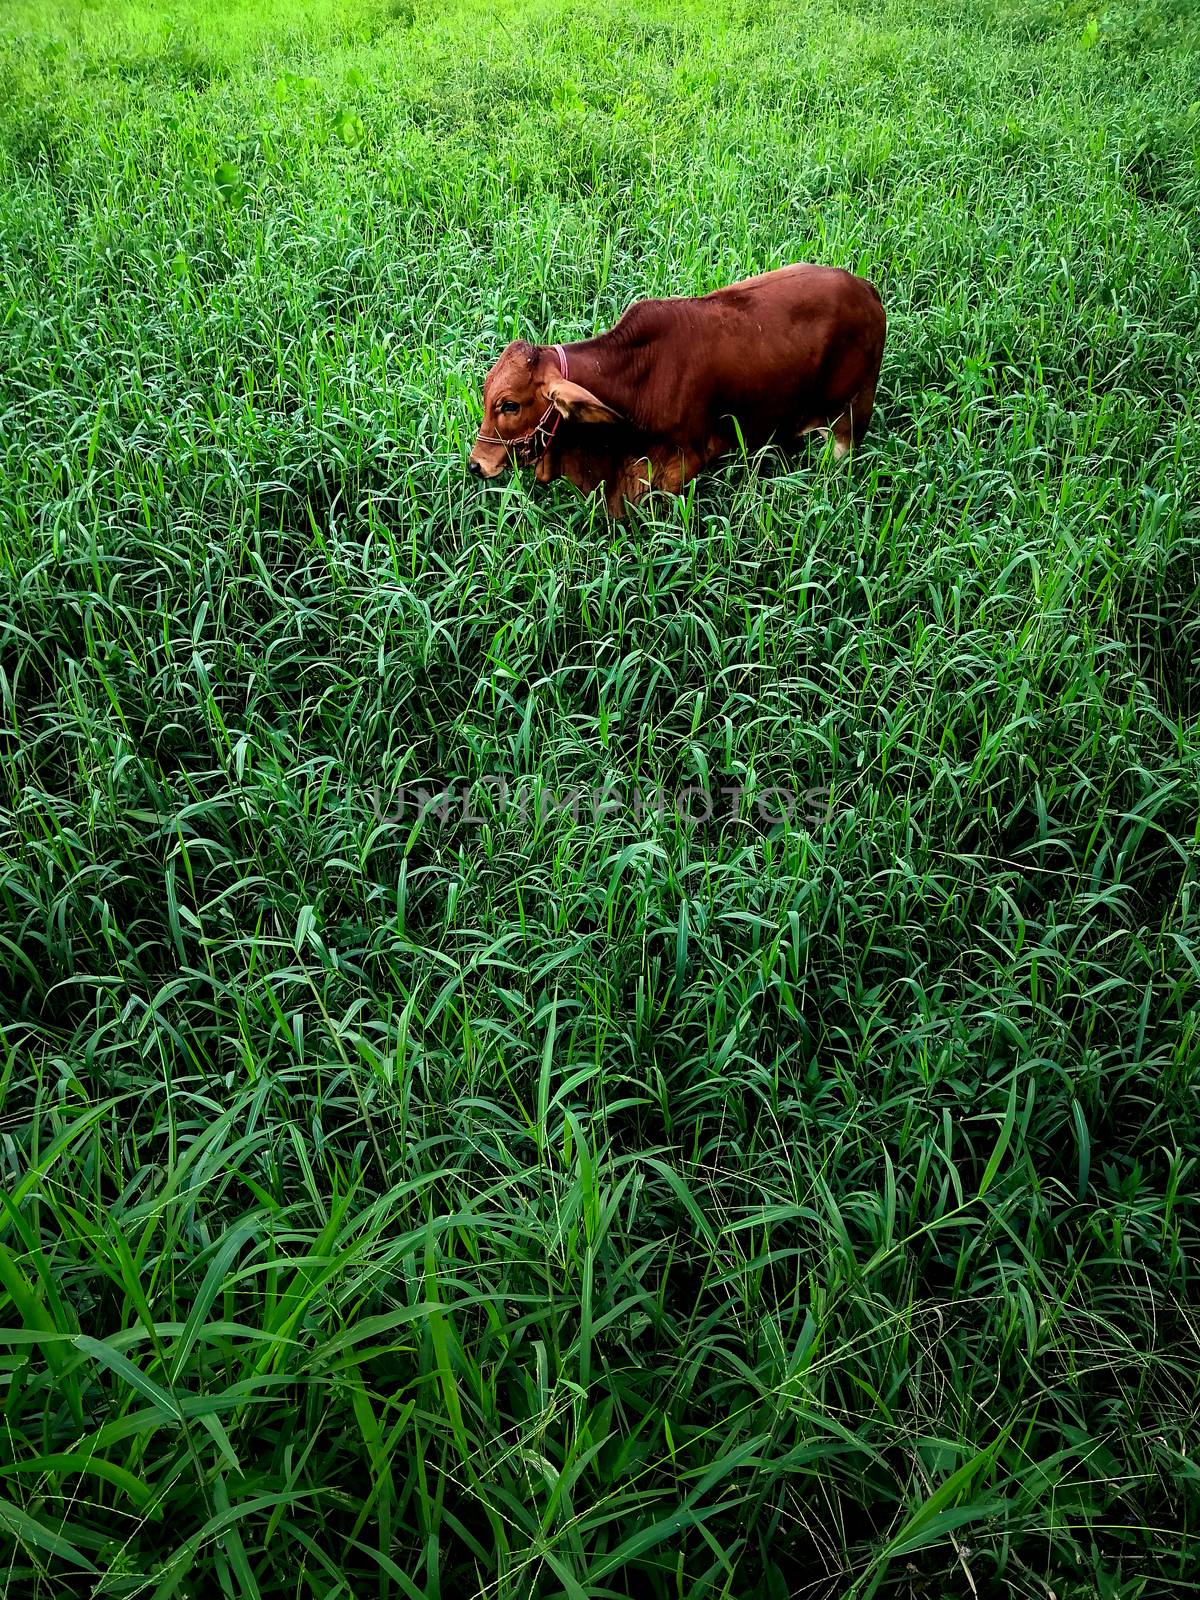 Calf that was left alone in the meadow